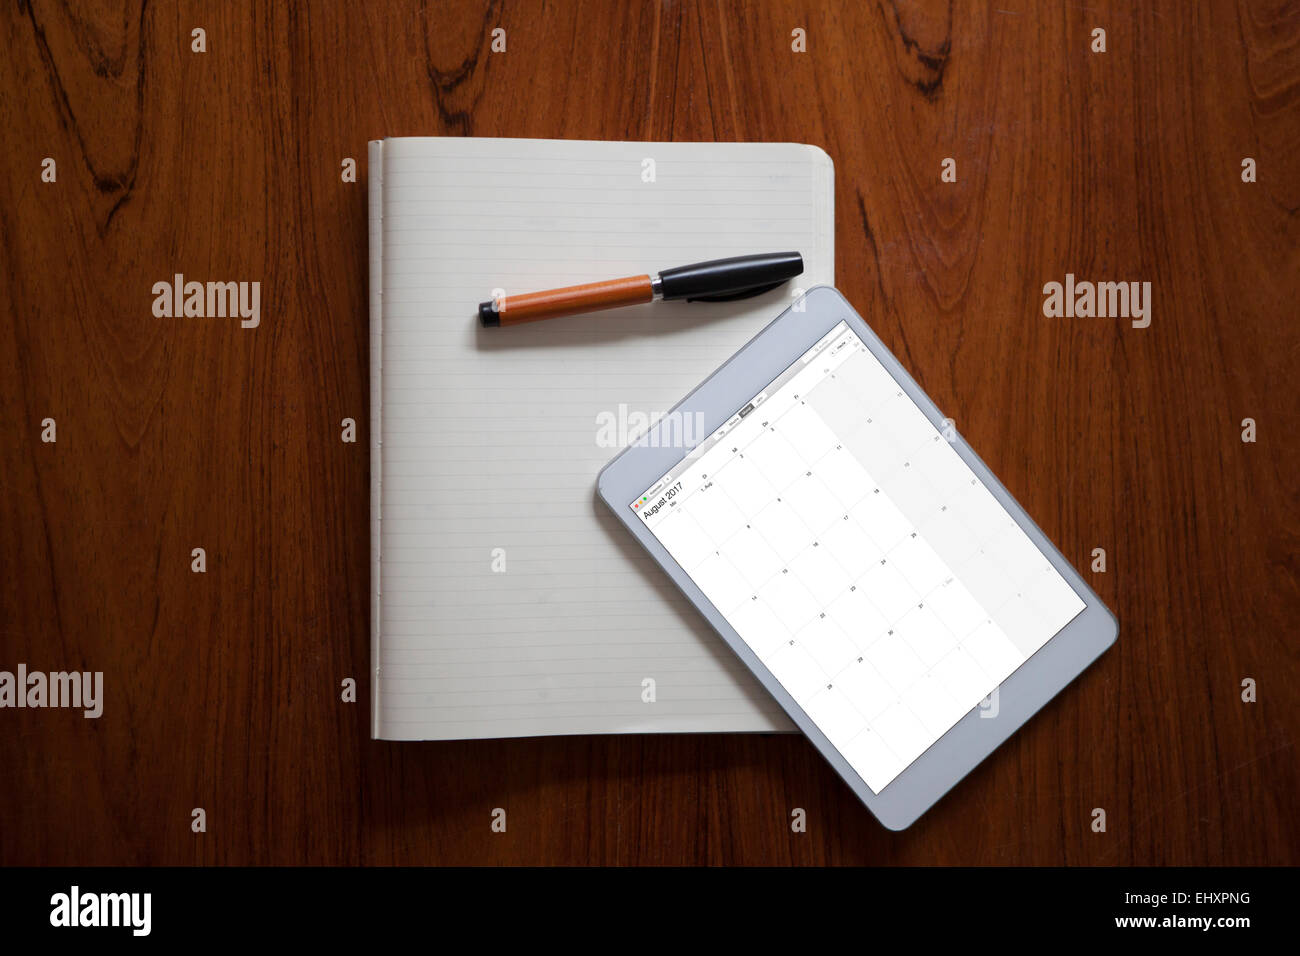 Digital tablet and ballpen lying on opened notebook Stock Photo